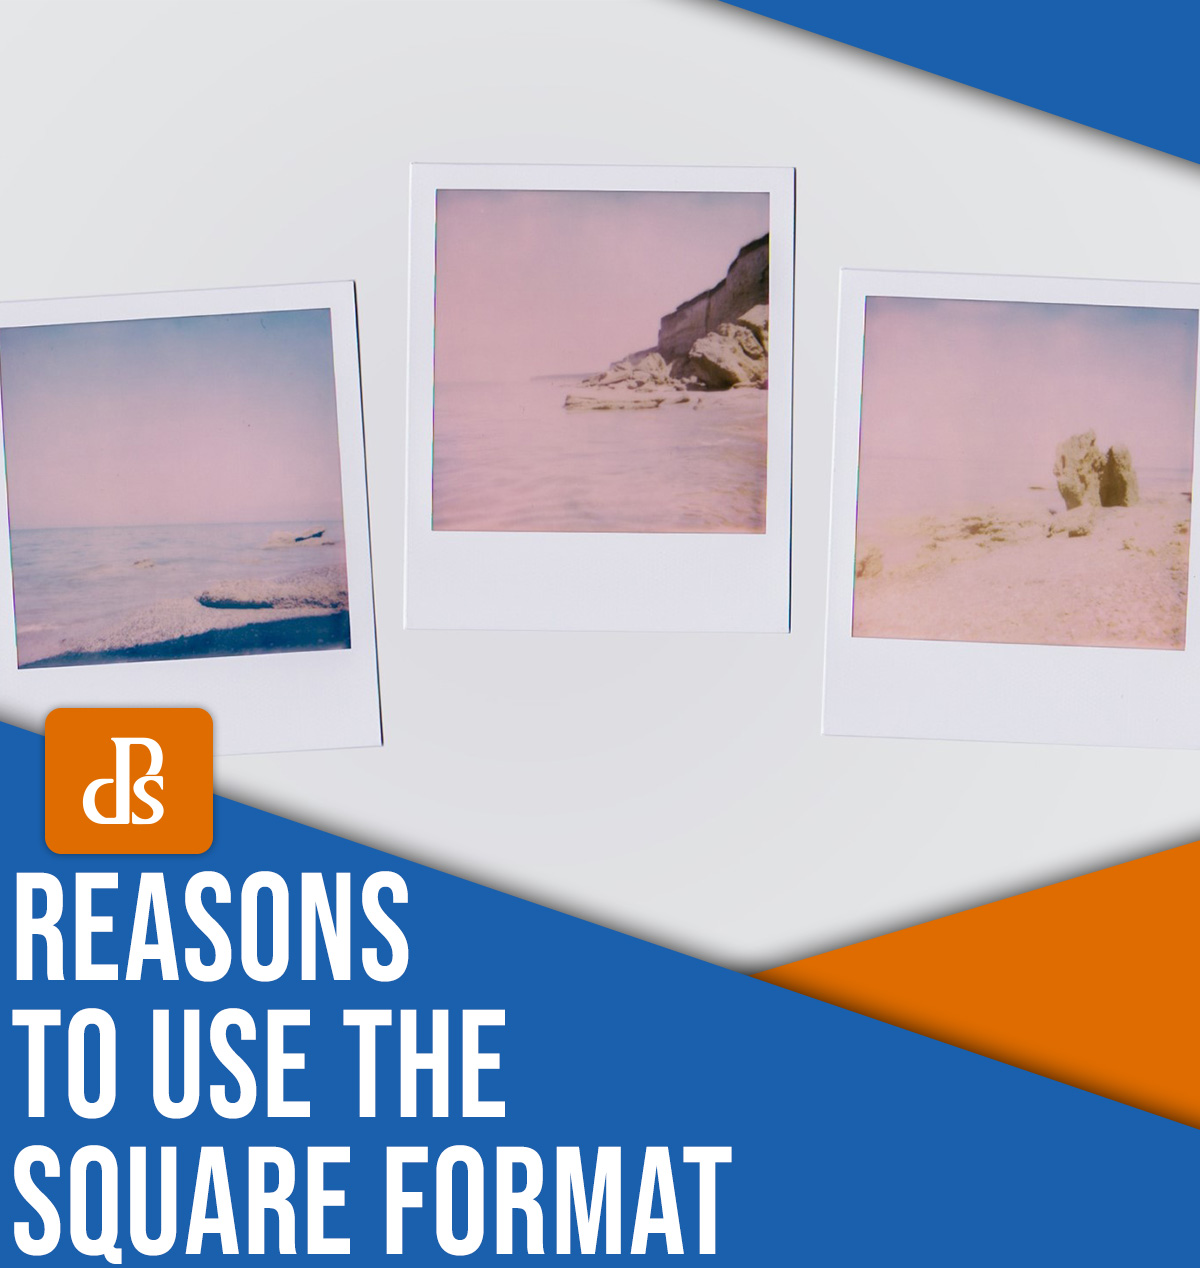 Reasons to use the square format